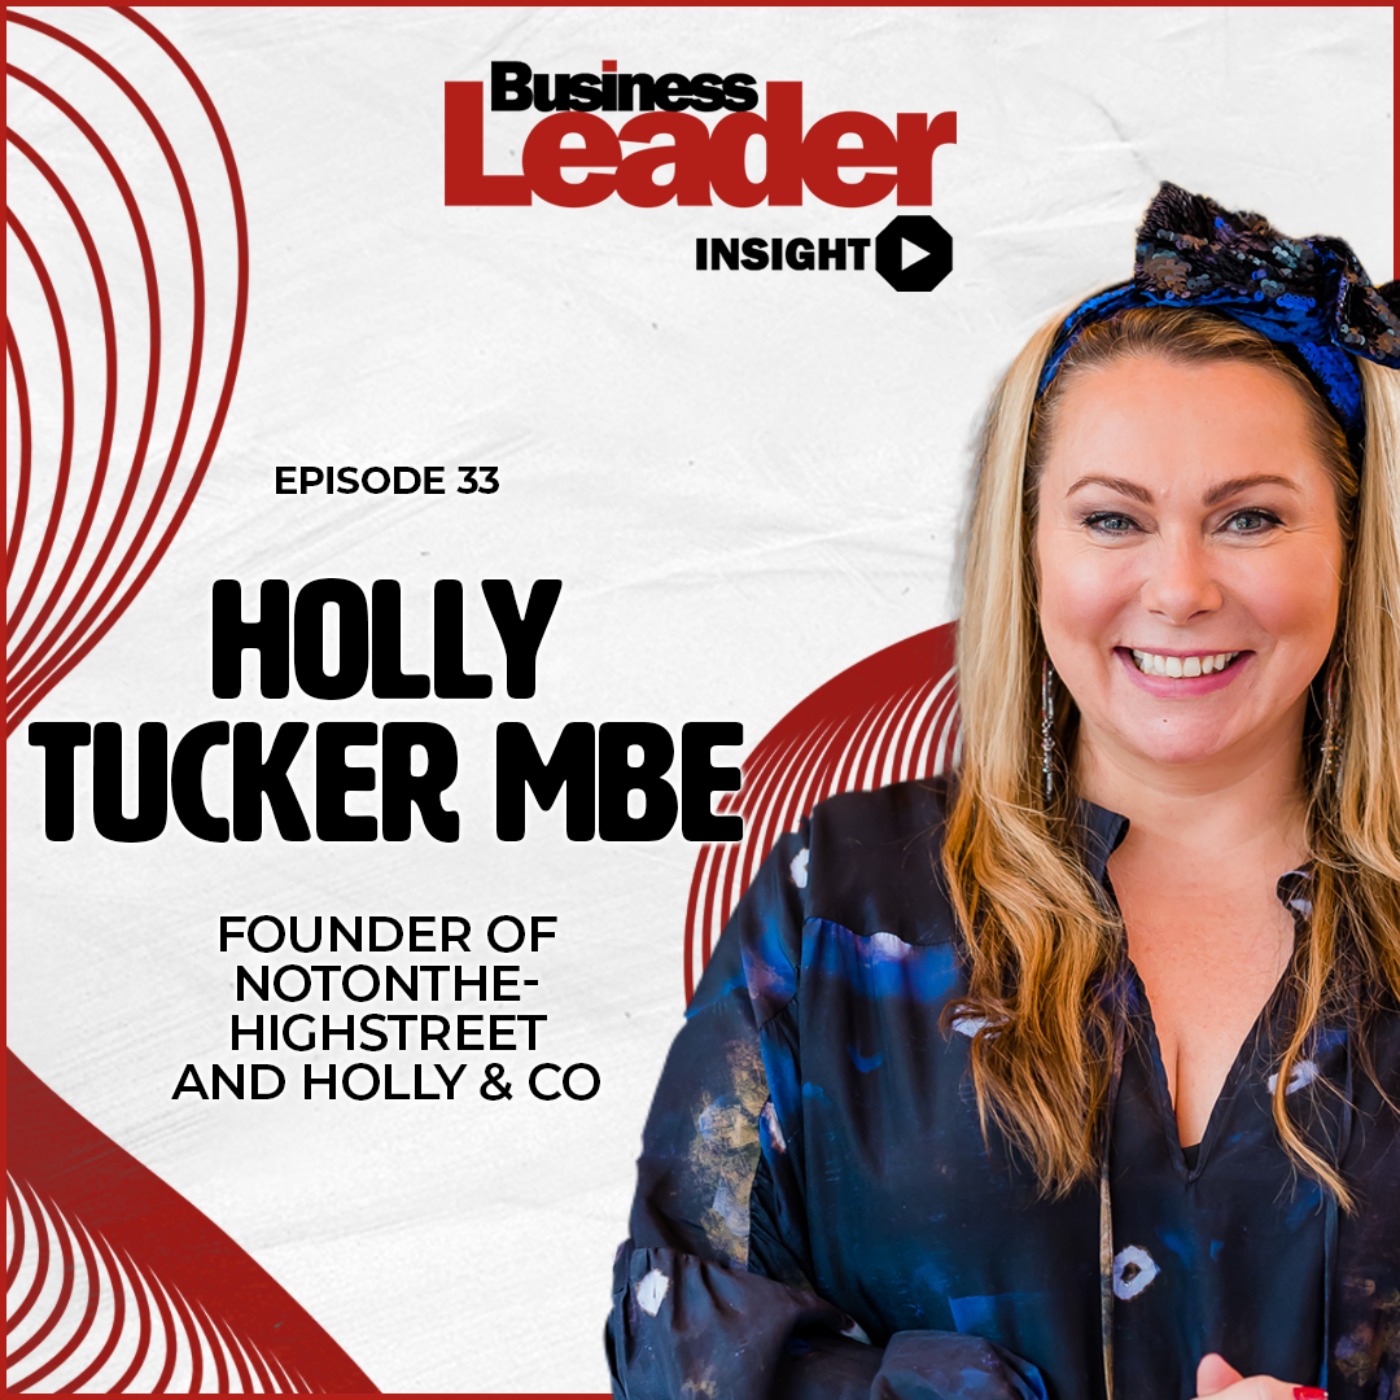 Holly Tucker MBE: founder of notonthehighstreet and Holly & Co